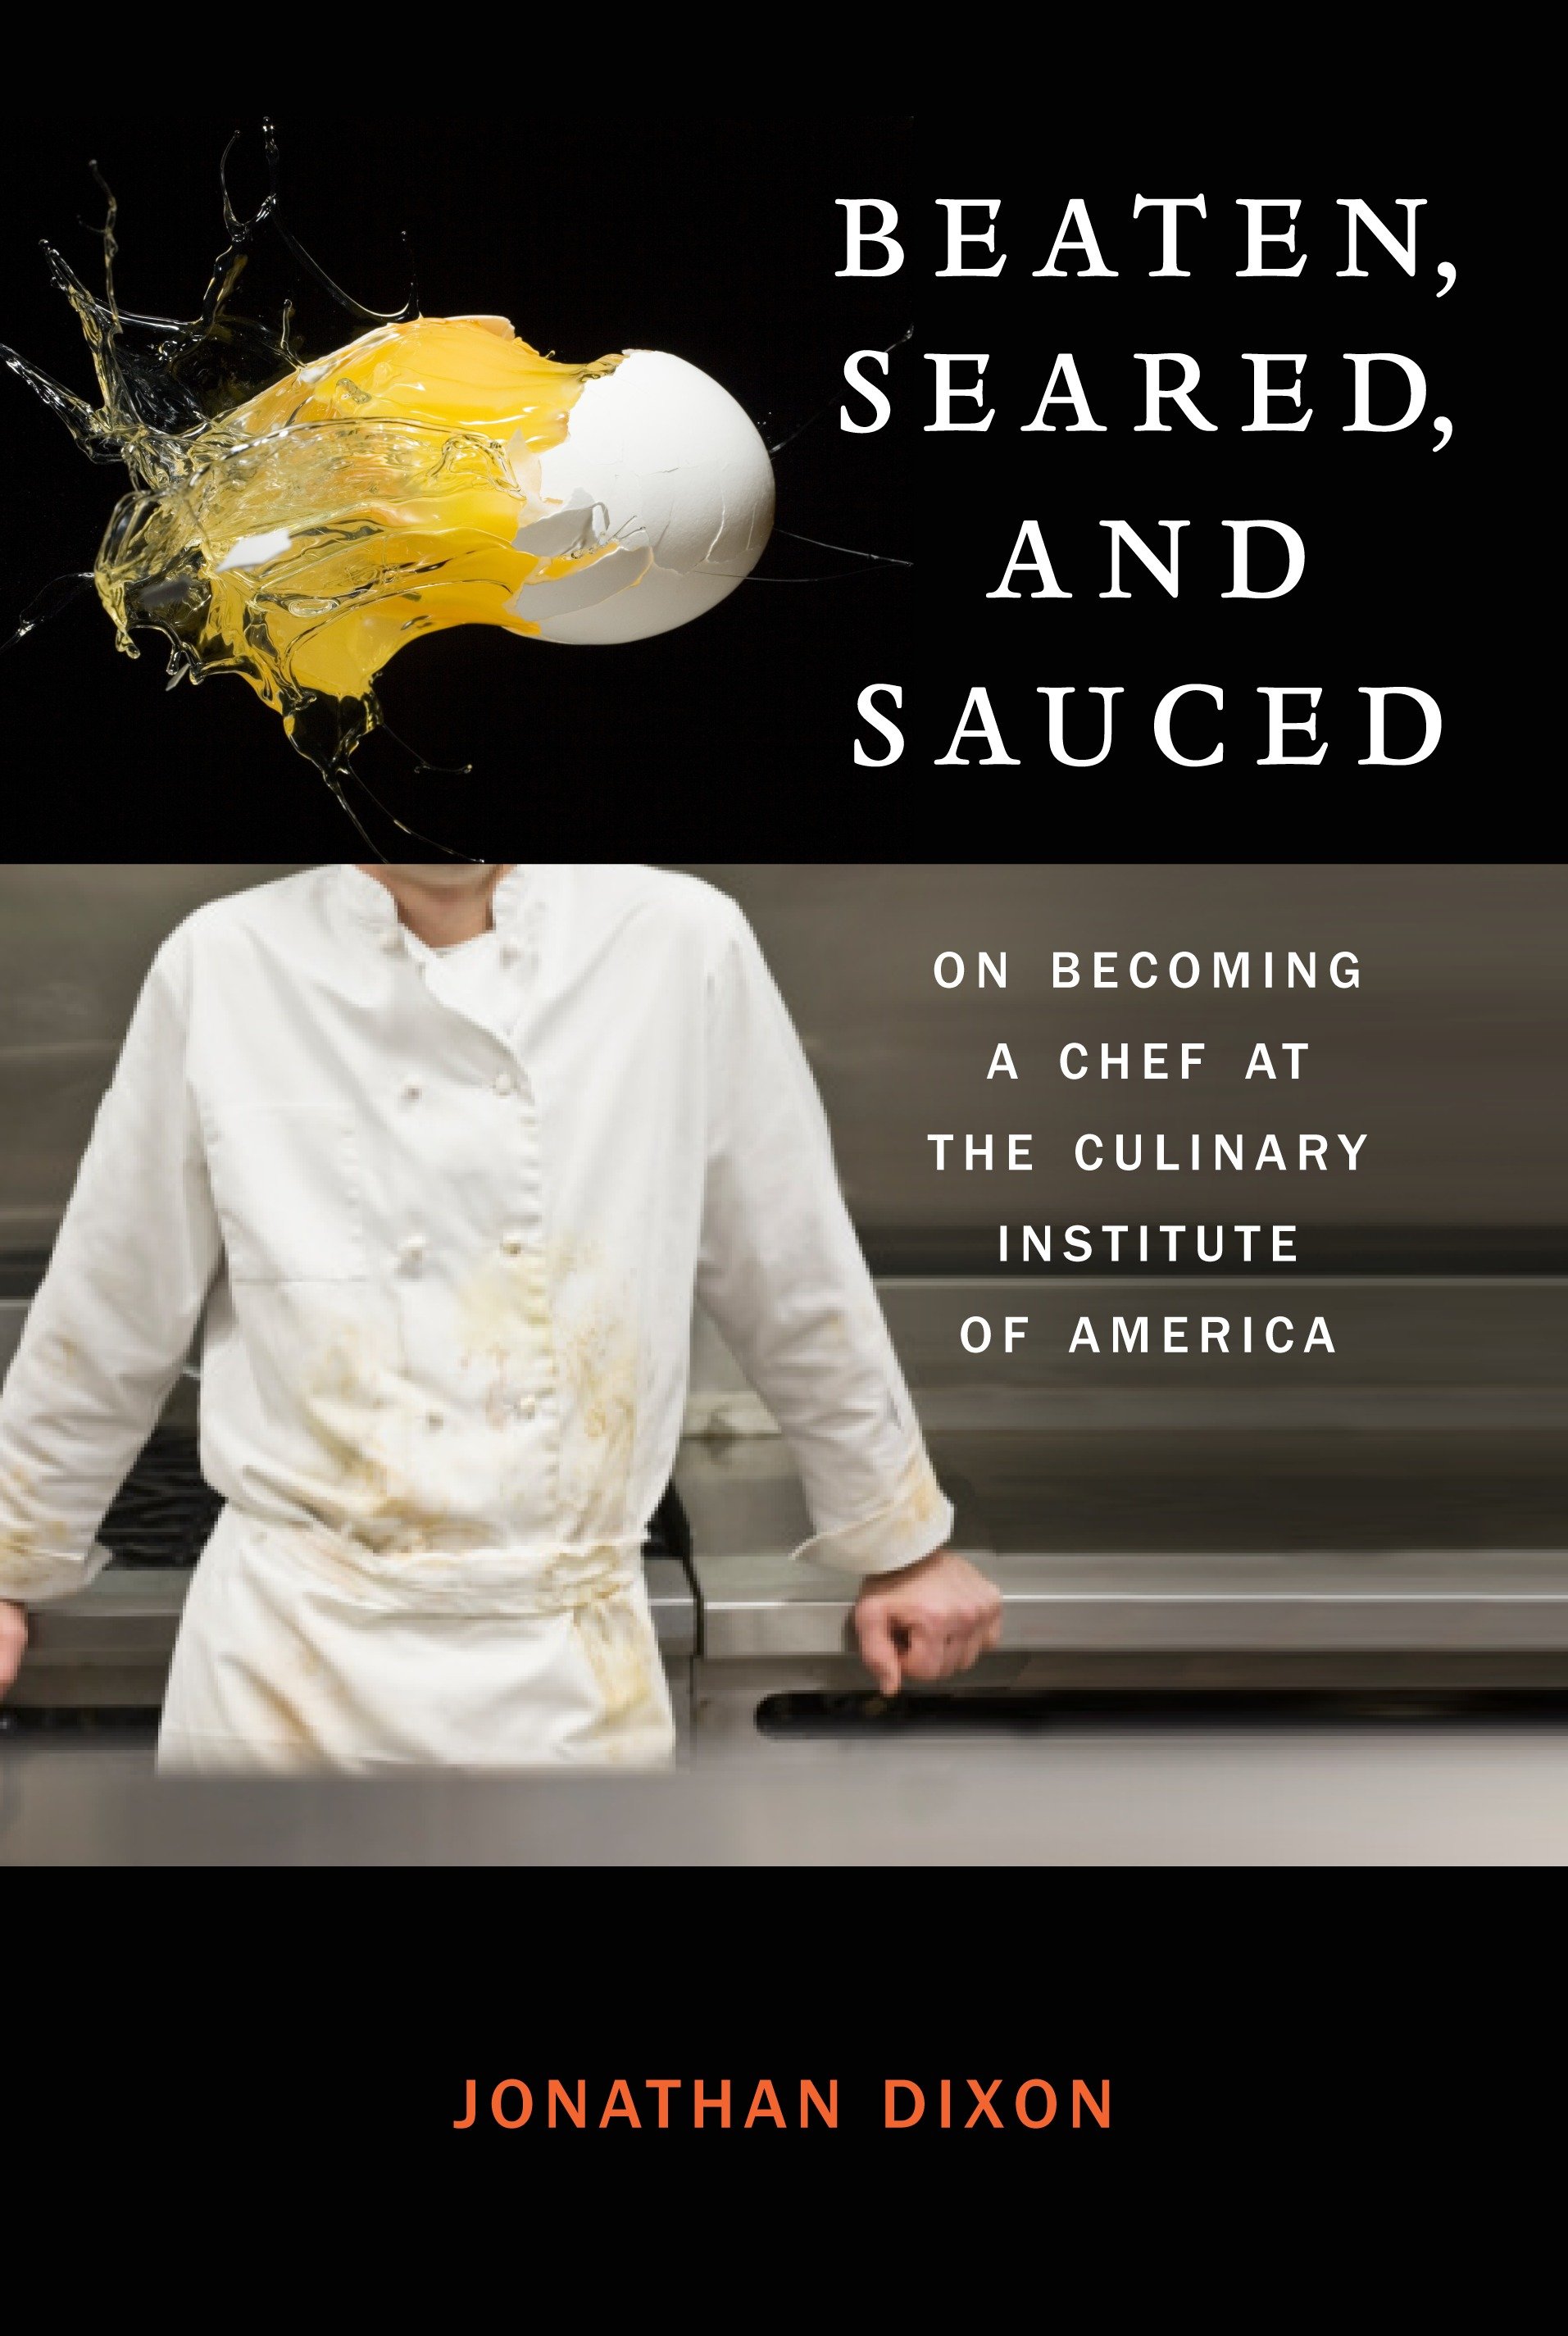 Beaten, seared, and sauced on becoming a chef at the Culinary Institute of America cover image